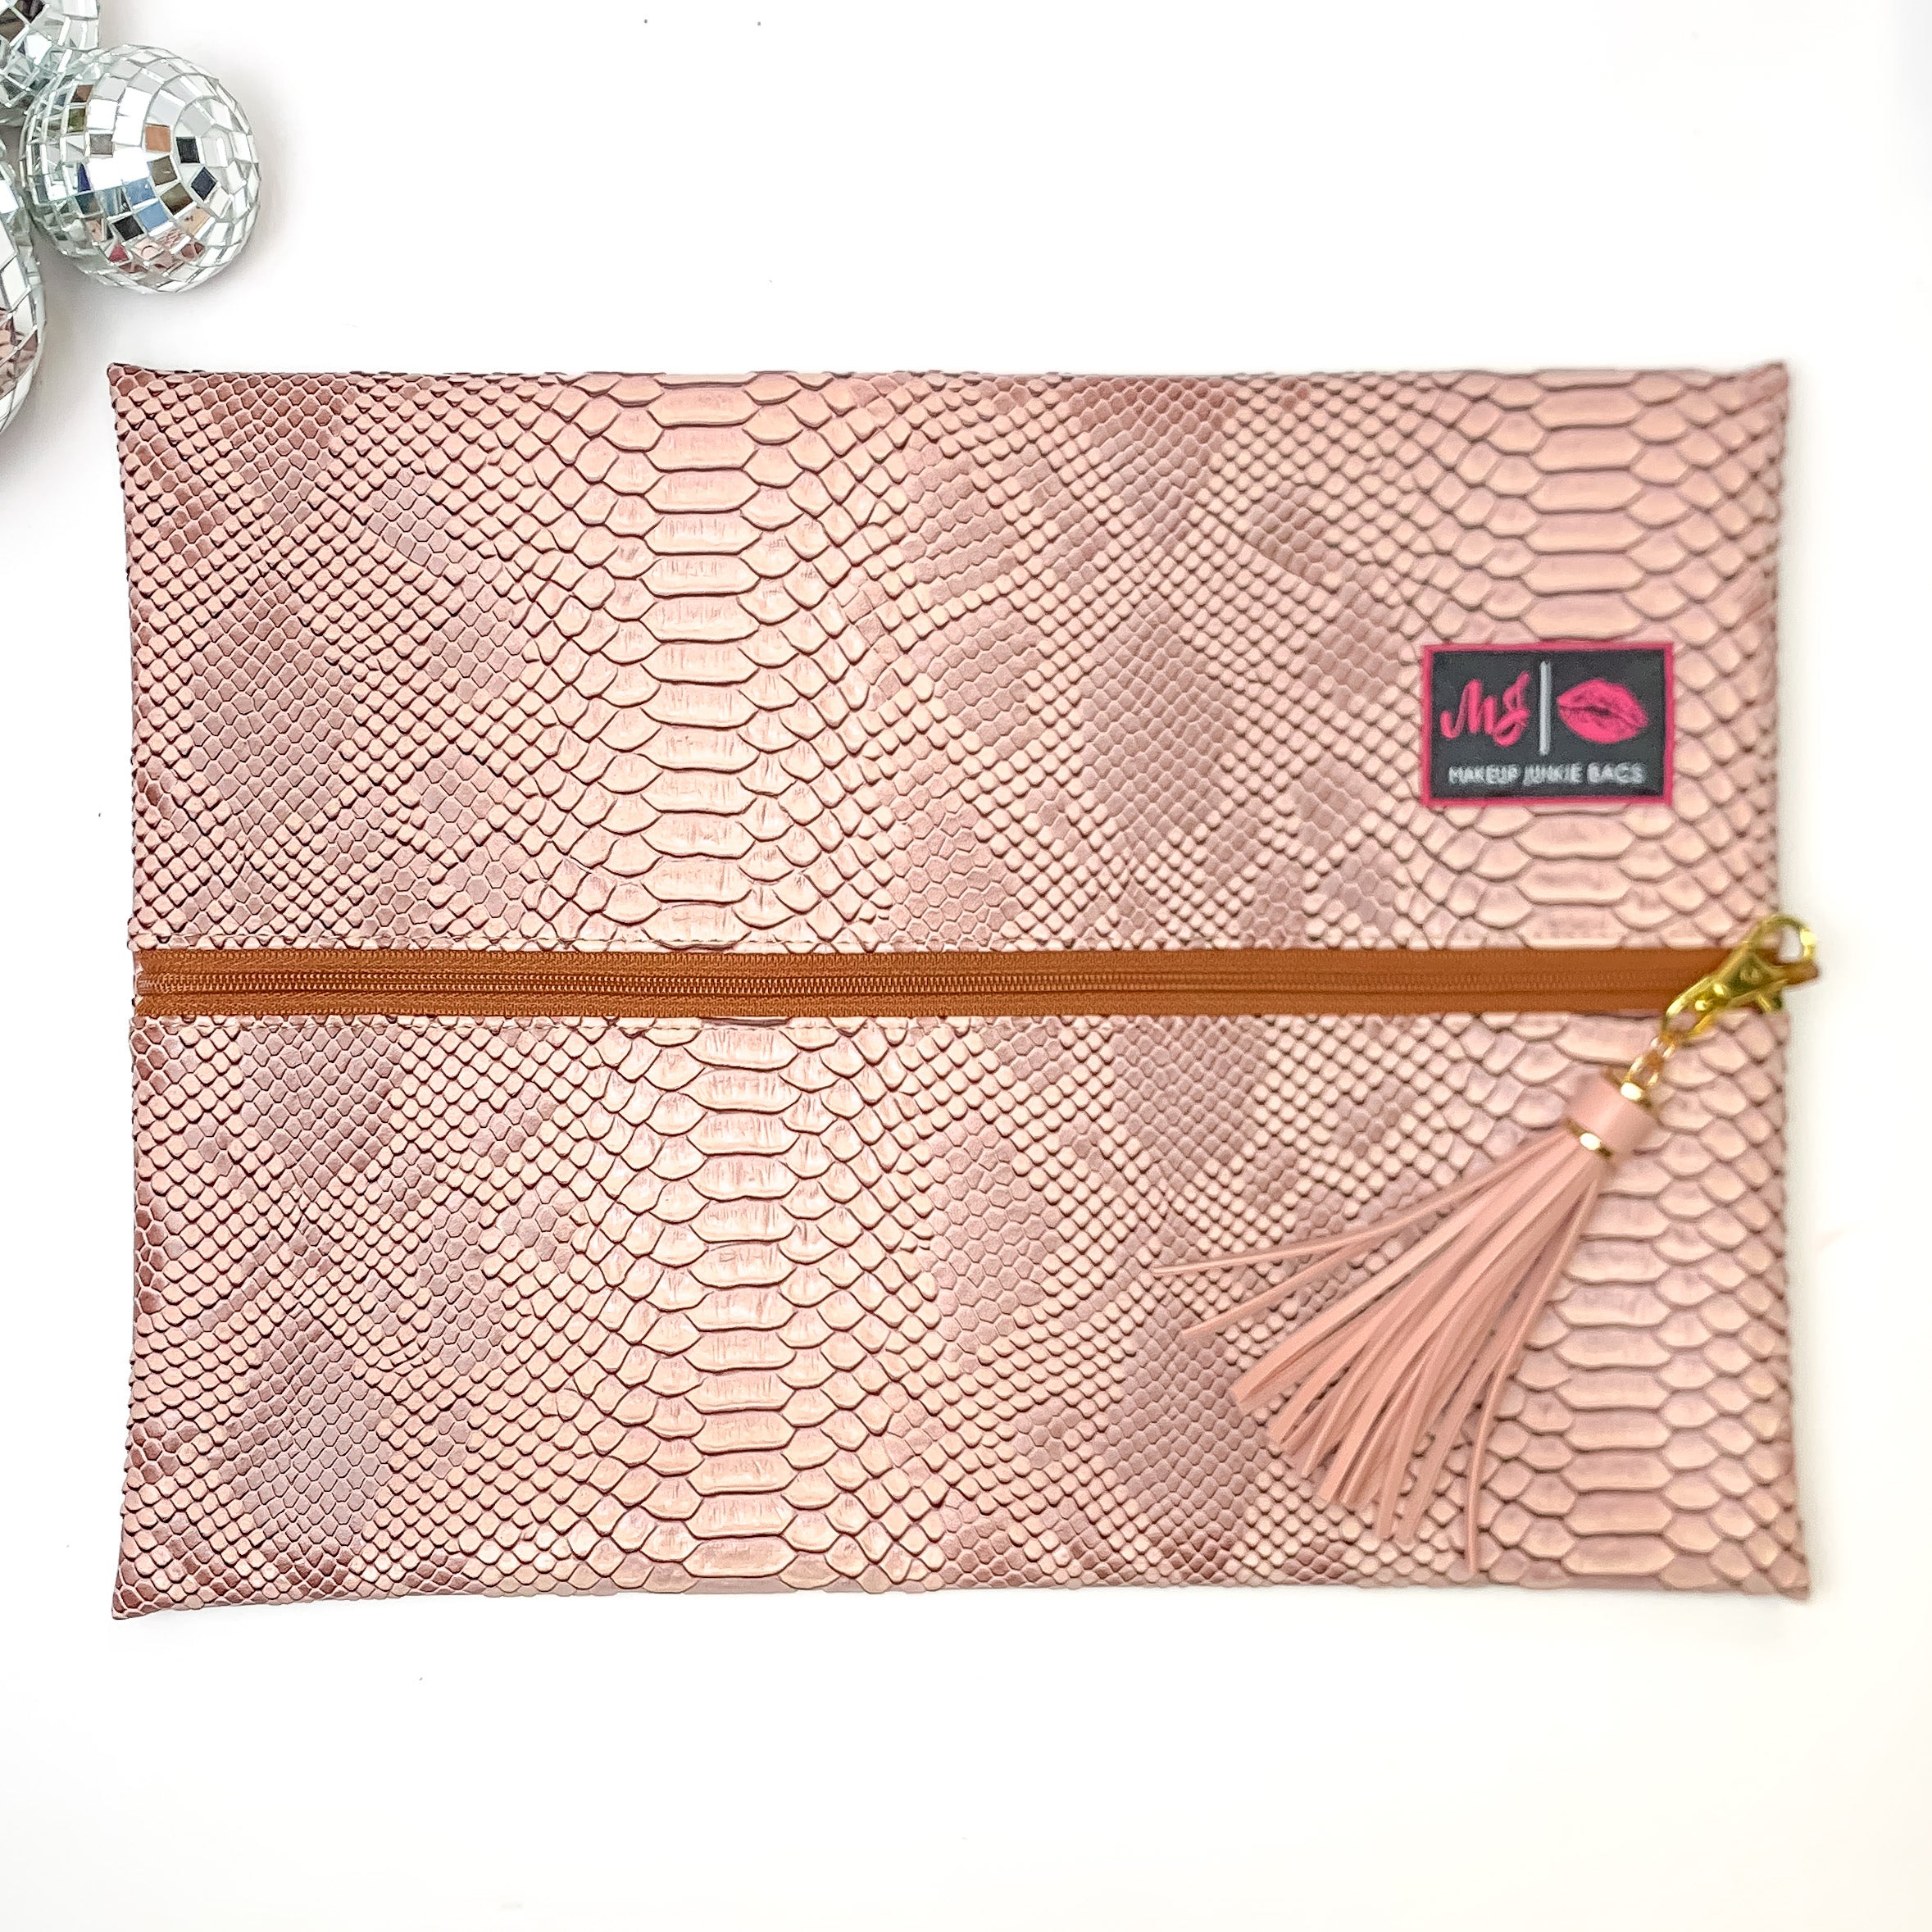 Makeup Junkie | Large Copperazzi Lay Flat Bag in Dusty Pink Snake Print - Giddy Up Glamour Boutique